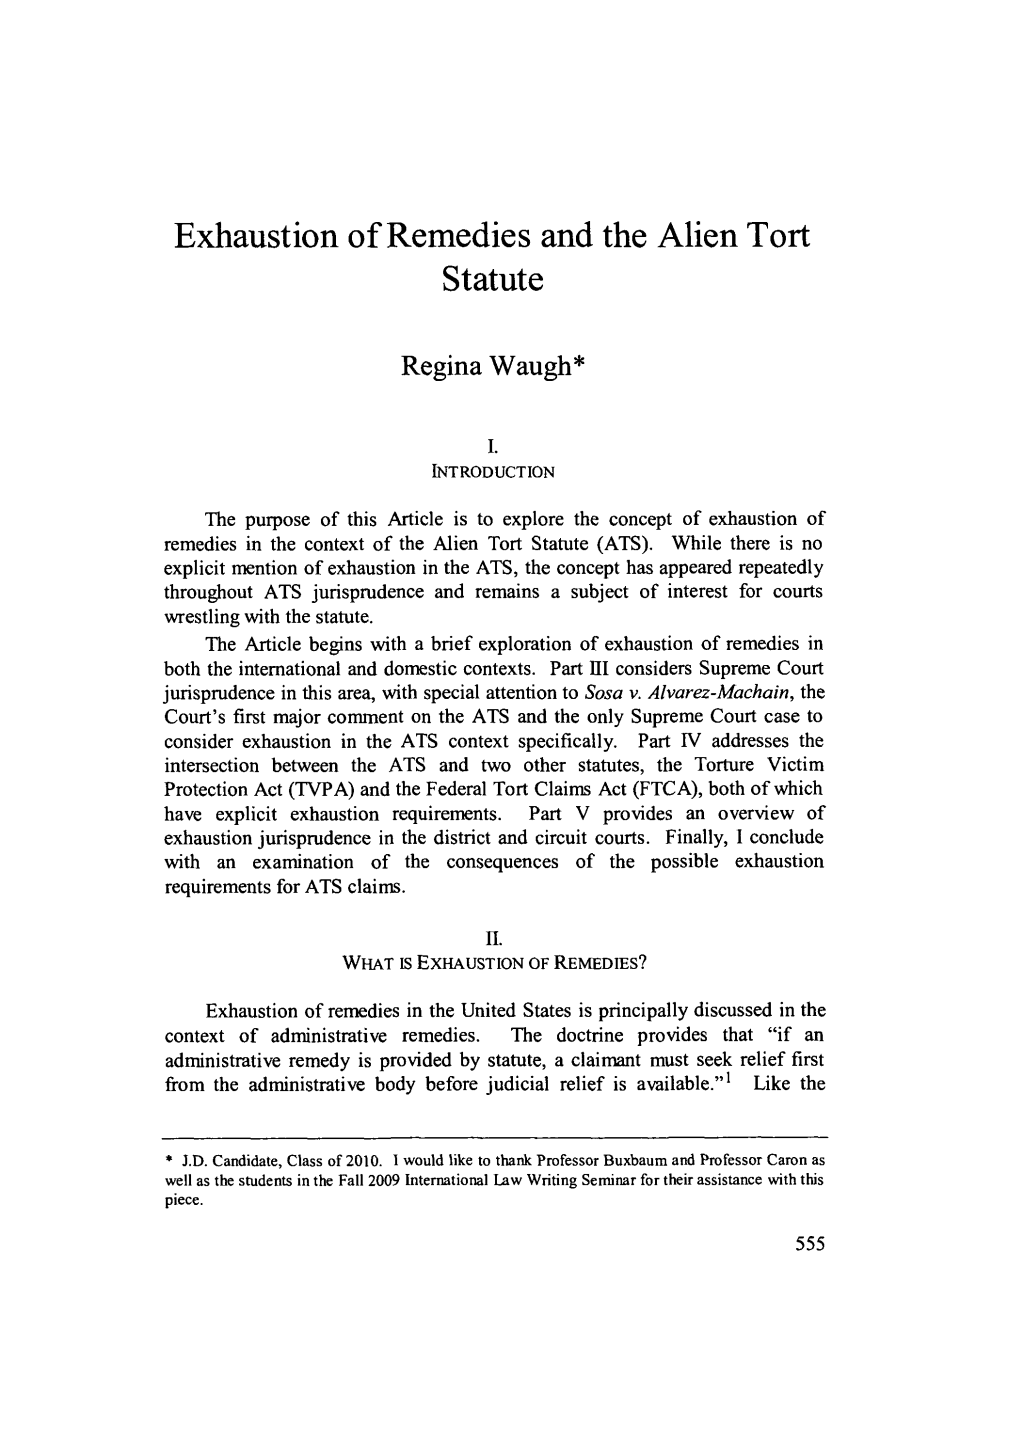 Exhaustion of Remedies and the Alien Tort Statute